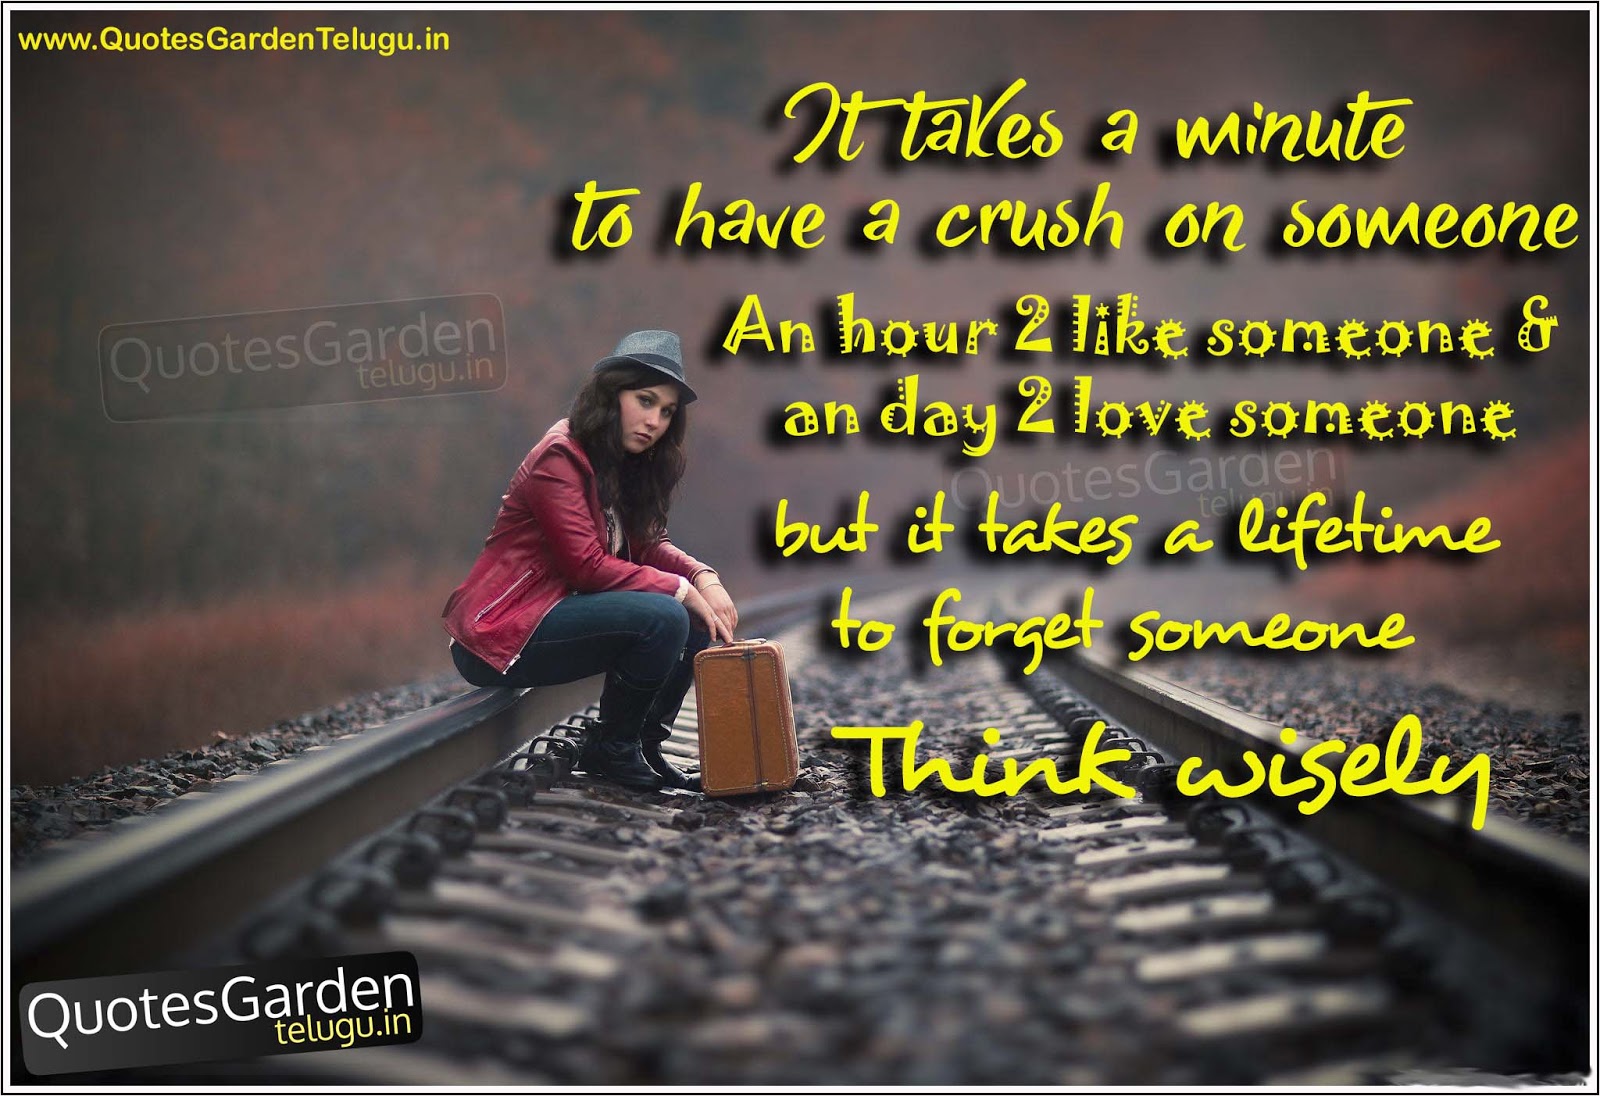 Heart Touching Quotes For Friends In English Heart touching quotes messages about relations